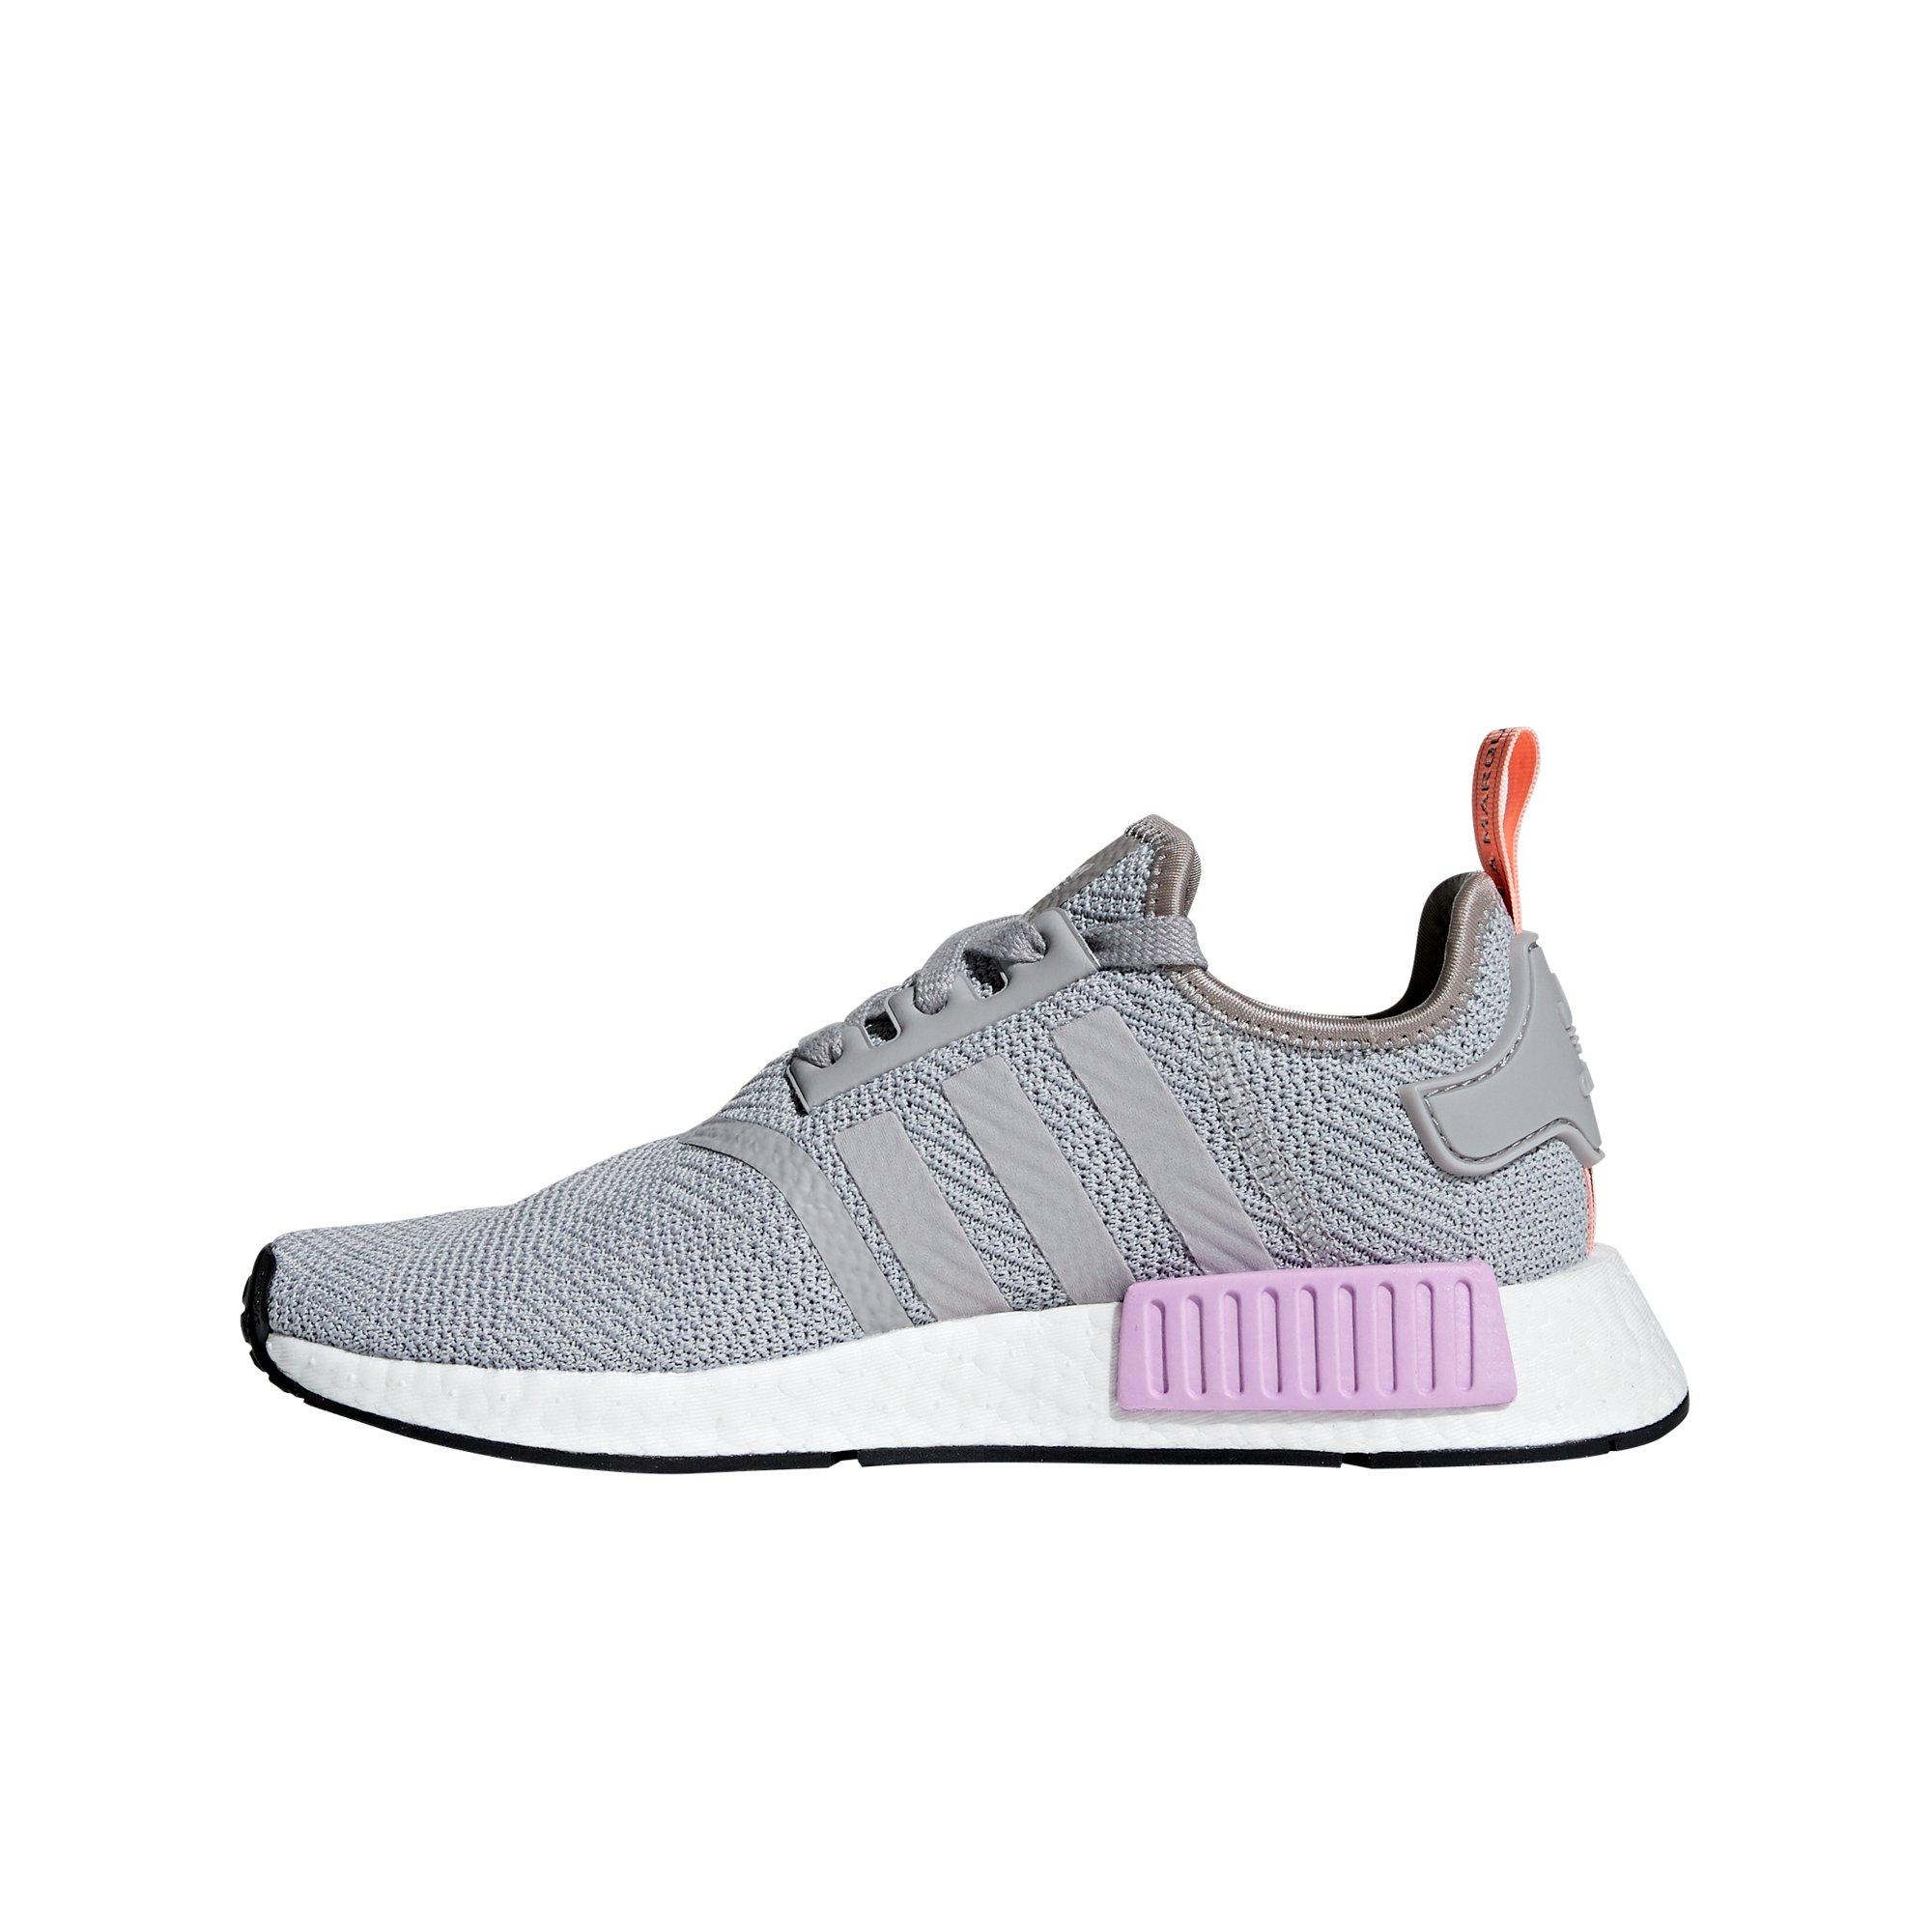 Comment porter is Adidas NMD R1 R2 XR1 CS.